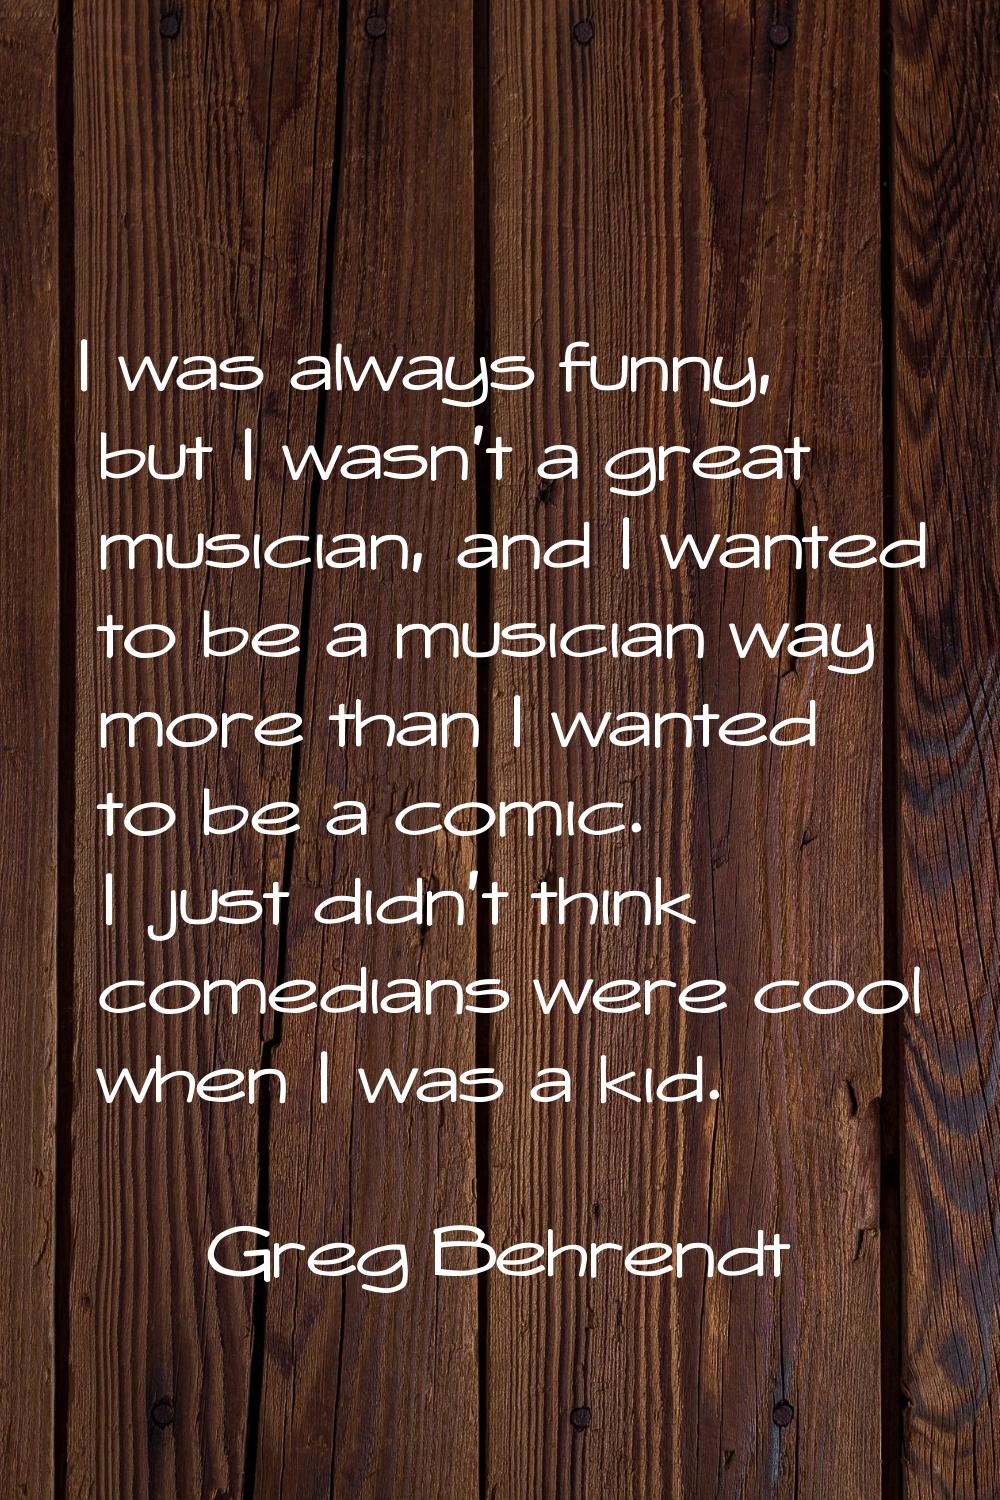 I was always funny, but I wasn't a great musician, and I wanted to be a musician way more than I wa